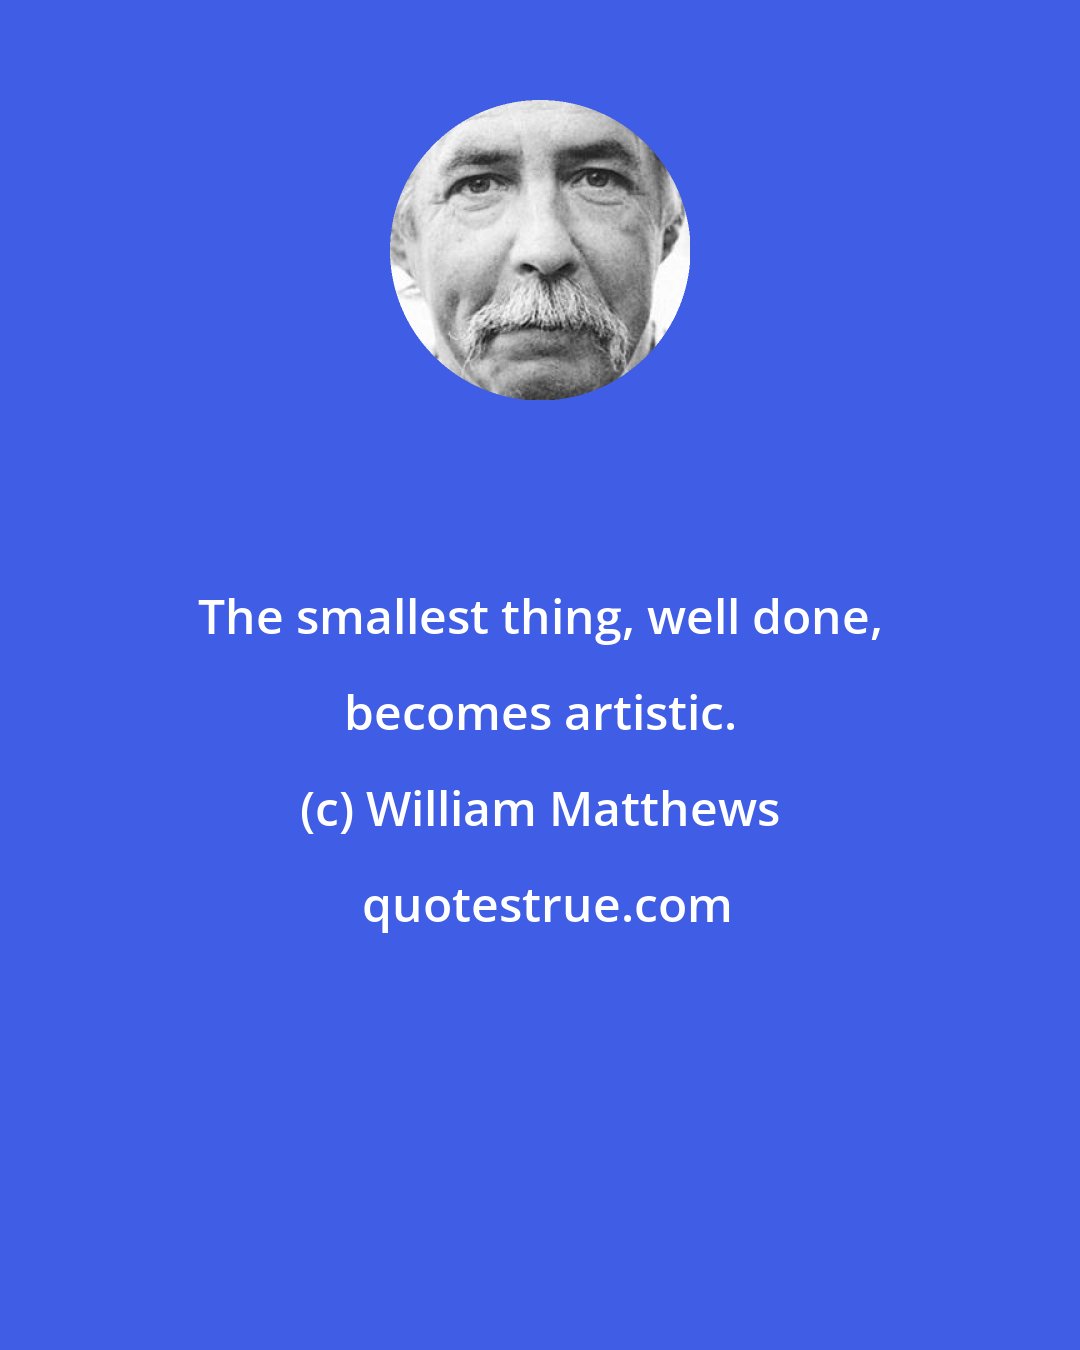 William Matthews: The smallest thing, well done, becomes artistic.